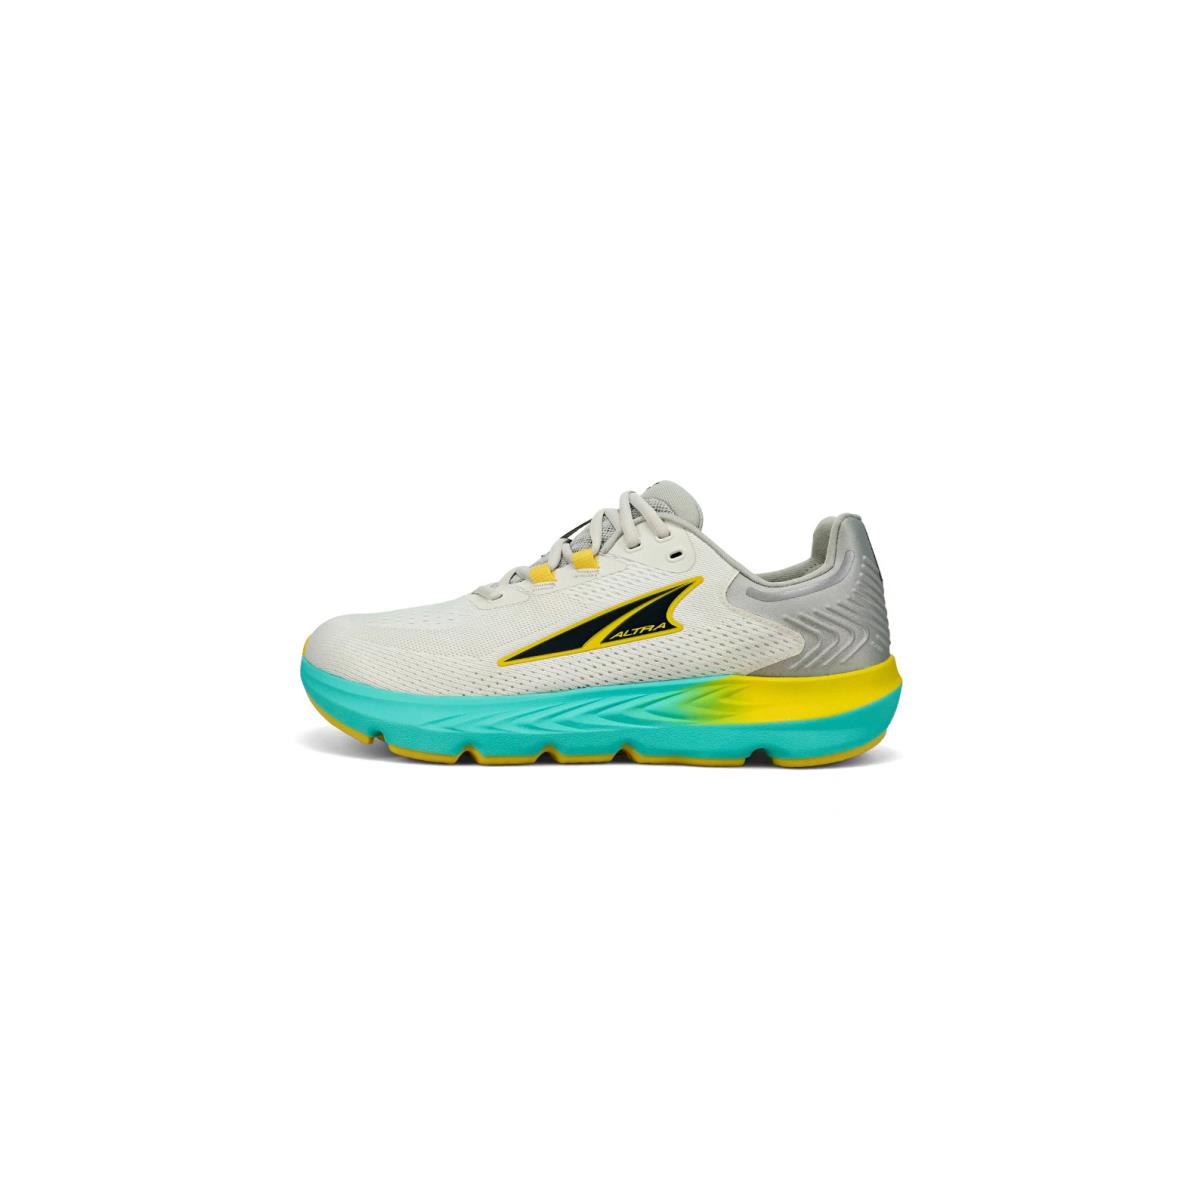 Altra Provision 7 Gray/yellow Road Running Shoes For Men`s AL0A7R6Z27